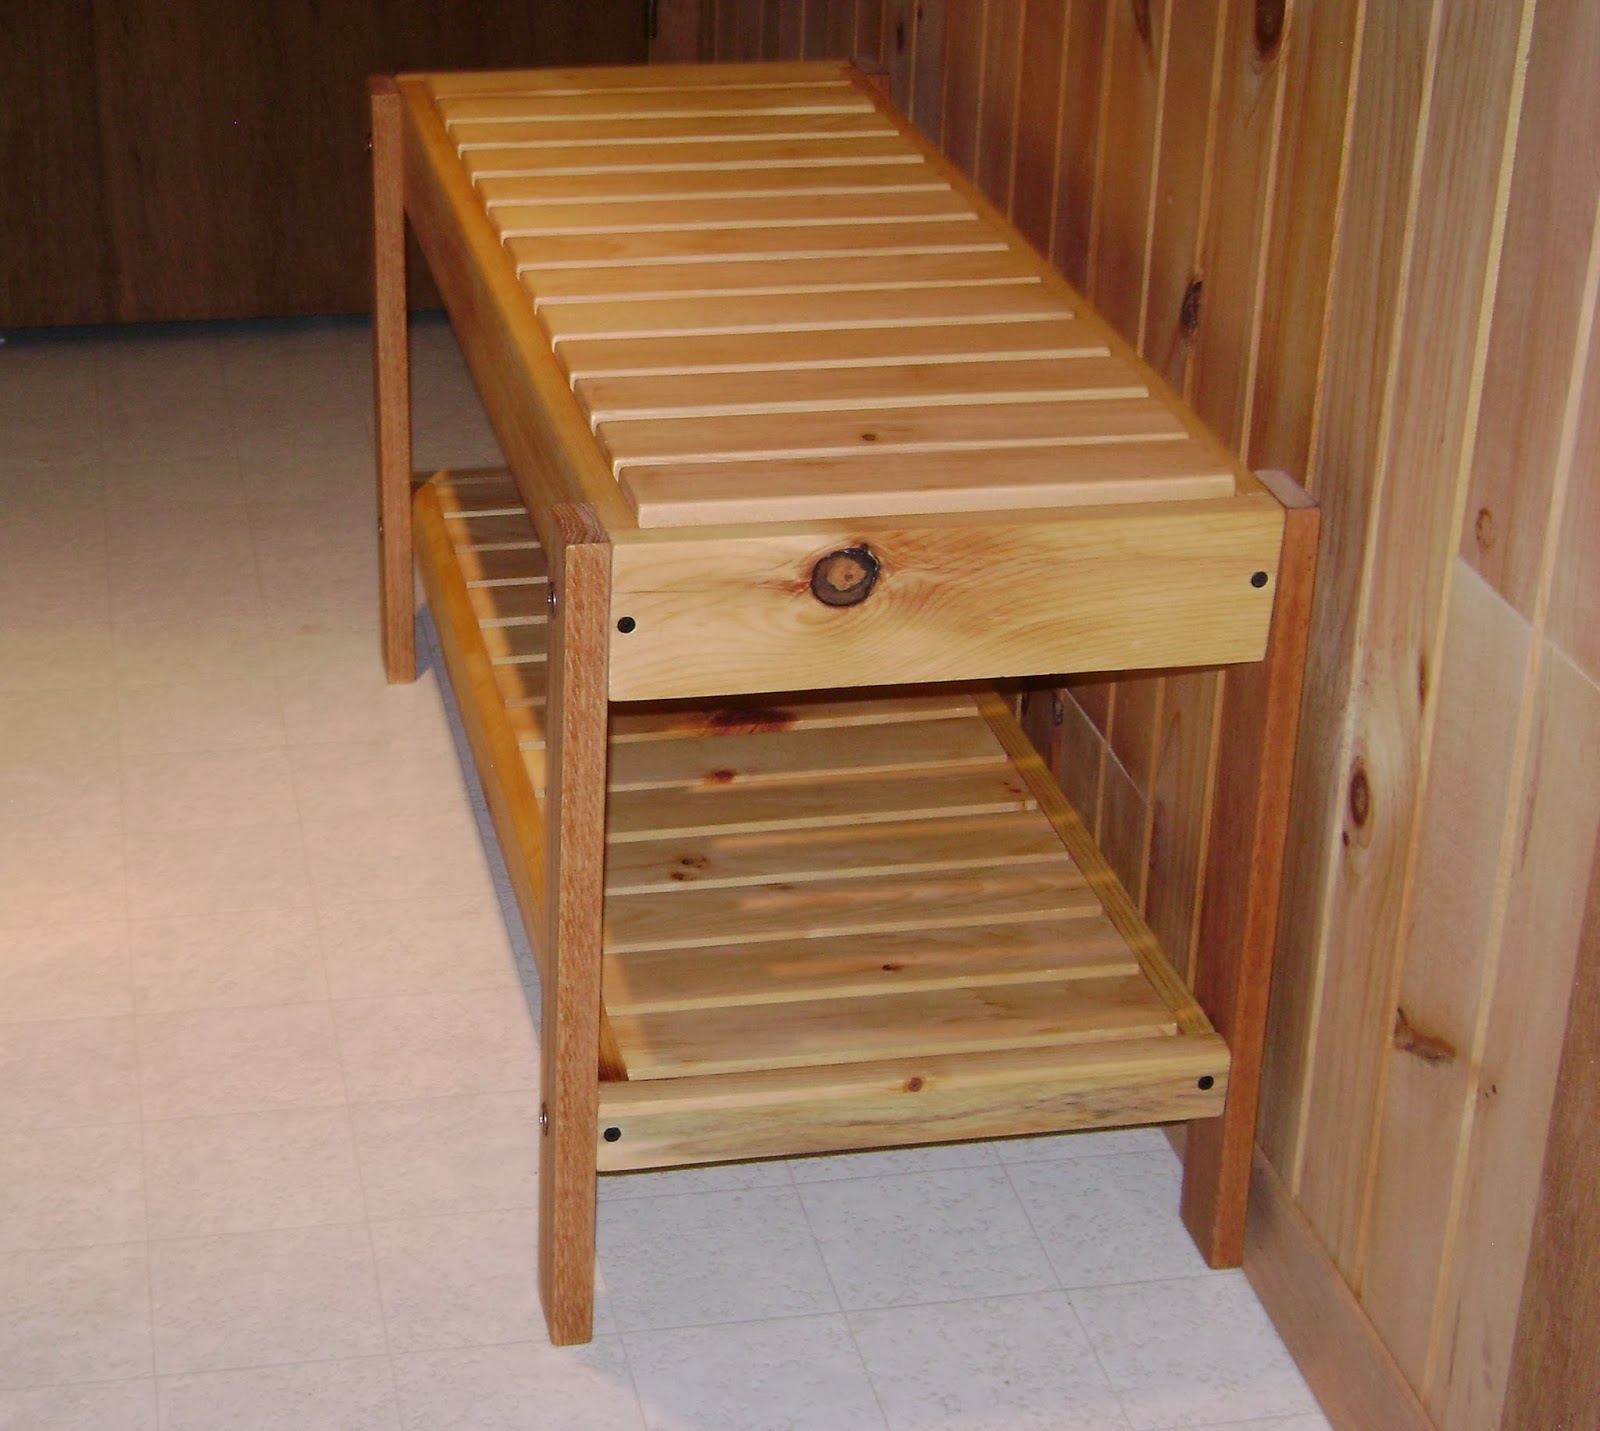 Bed Bench Plans PDF Woodworking